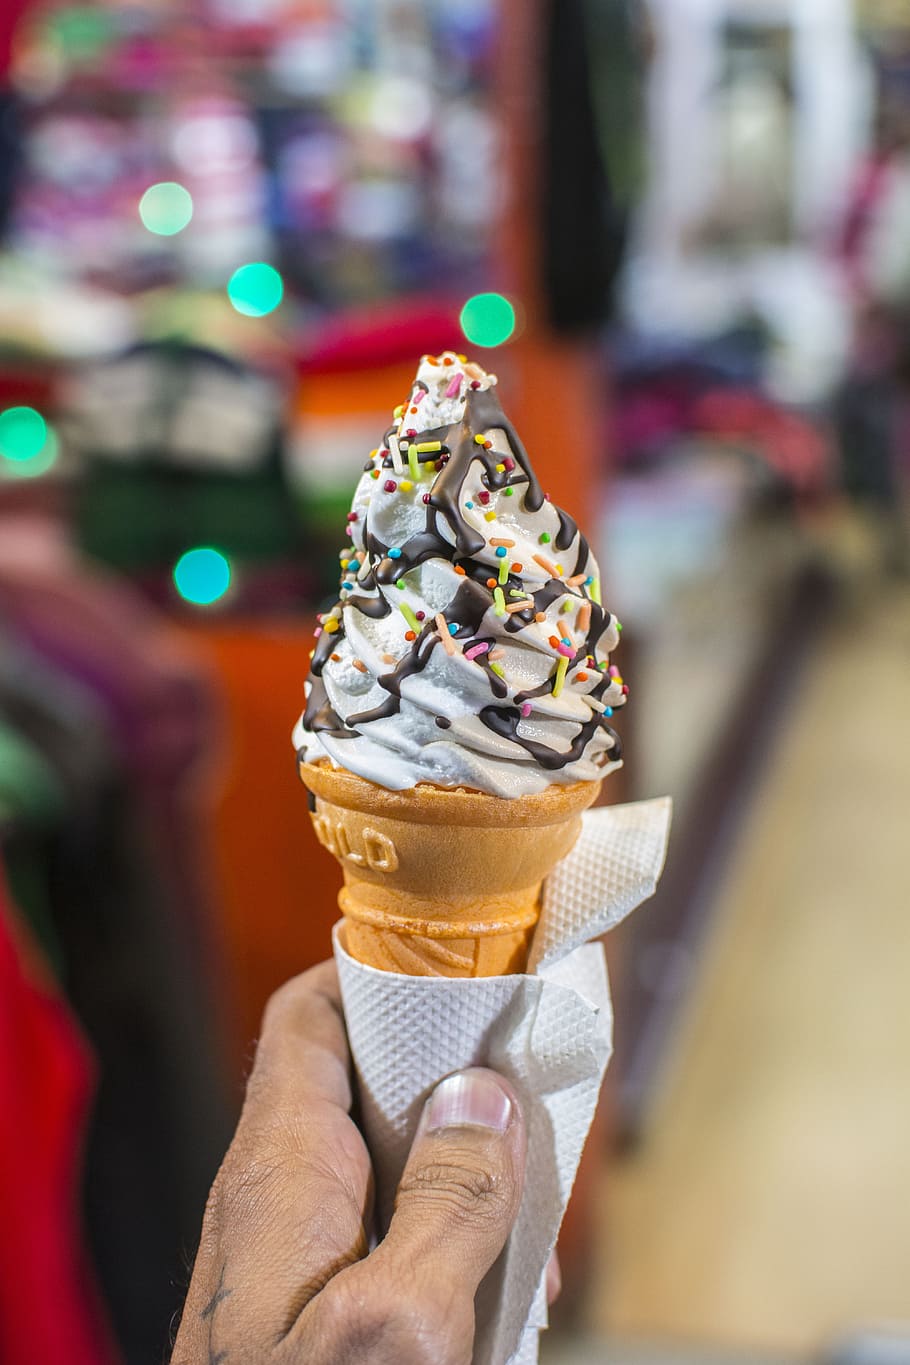 person, holding, wafer cone, soft-served ice cream, topped, sprinkles, chocolate, dessert, ice cream, lights